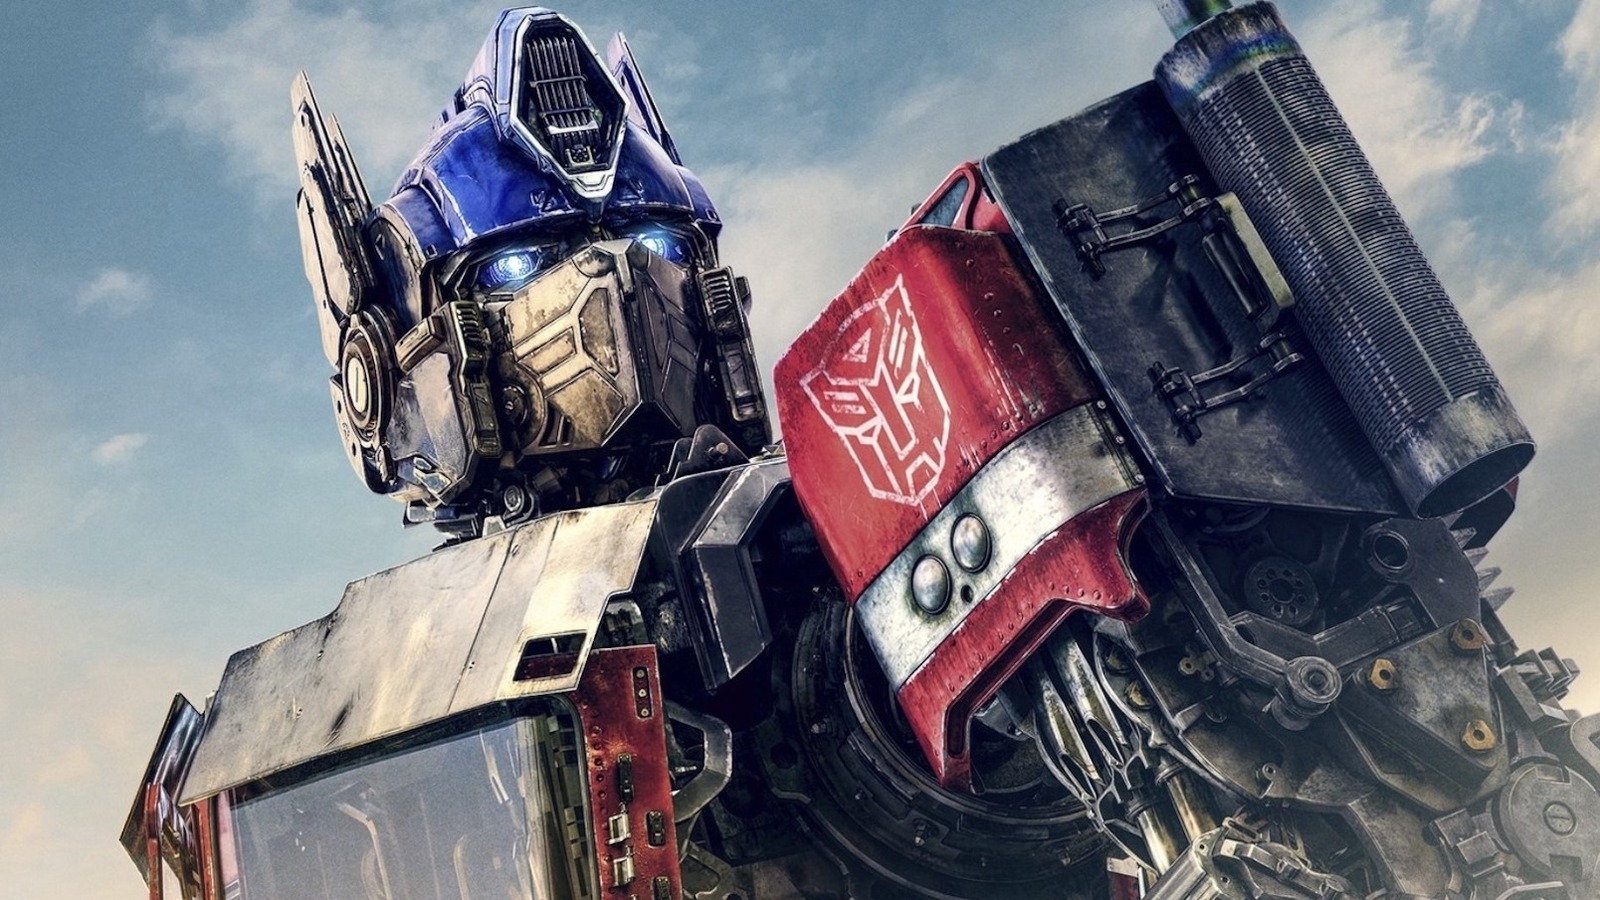 Transformers Rise of The Beasts Movie Derivatives Optimus Prime